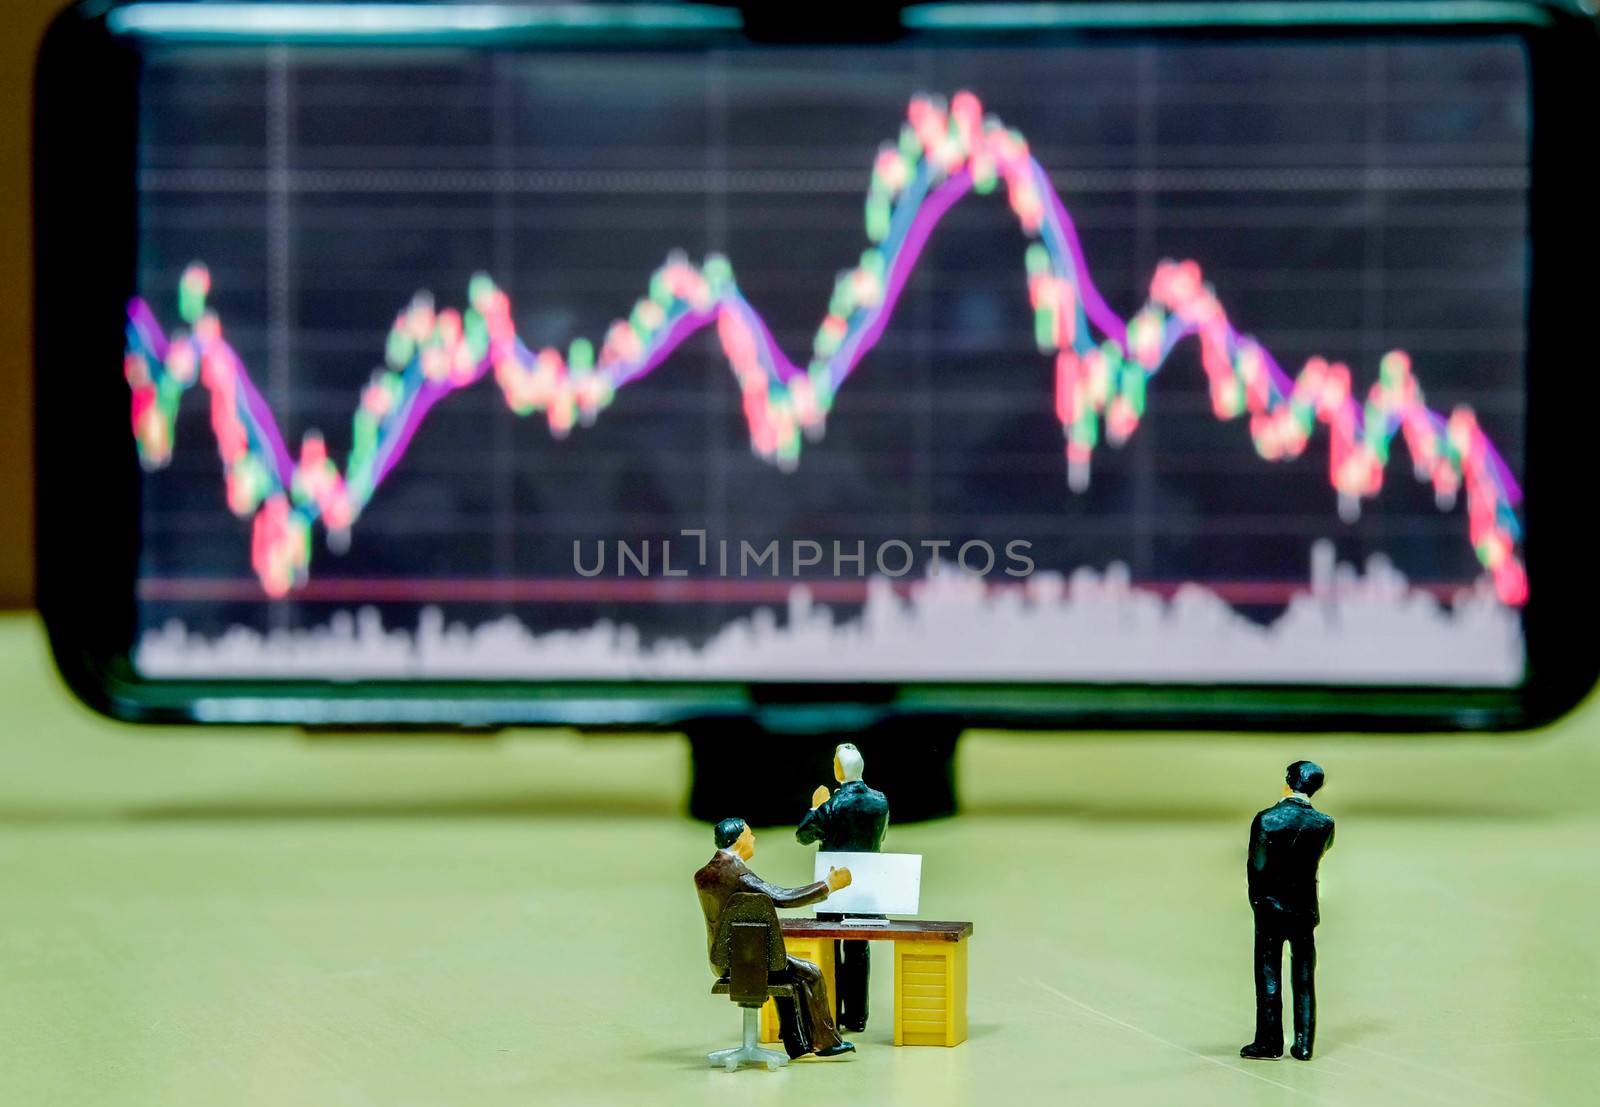 Miniature figure business people or Stock Trader looking at Blur by Bonn2210